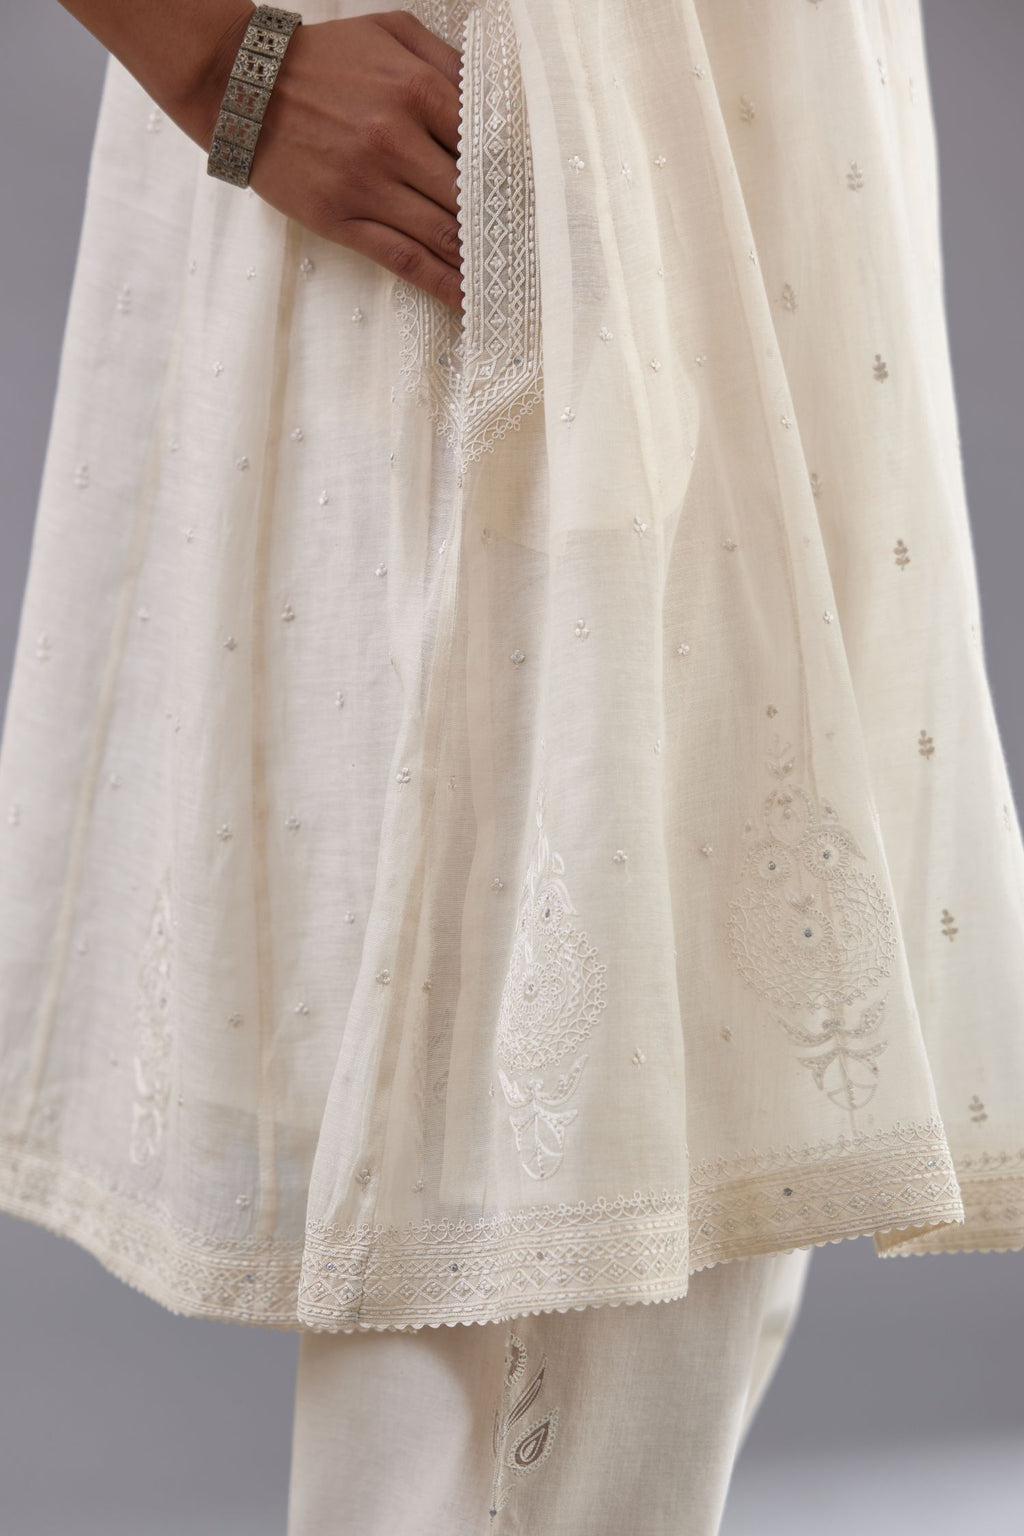 Off white cotton chanderi short kalidar phiran style kurta set with button placket neckline and dori and silk thraed embroidery all over.